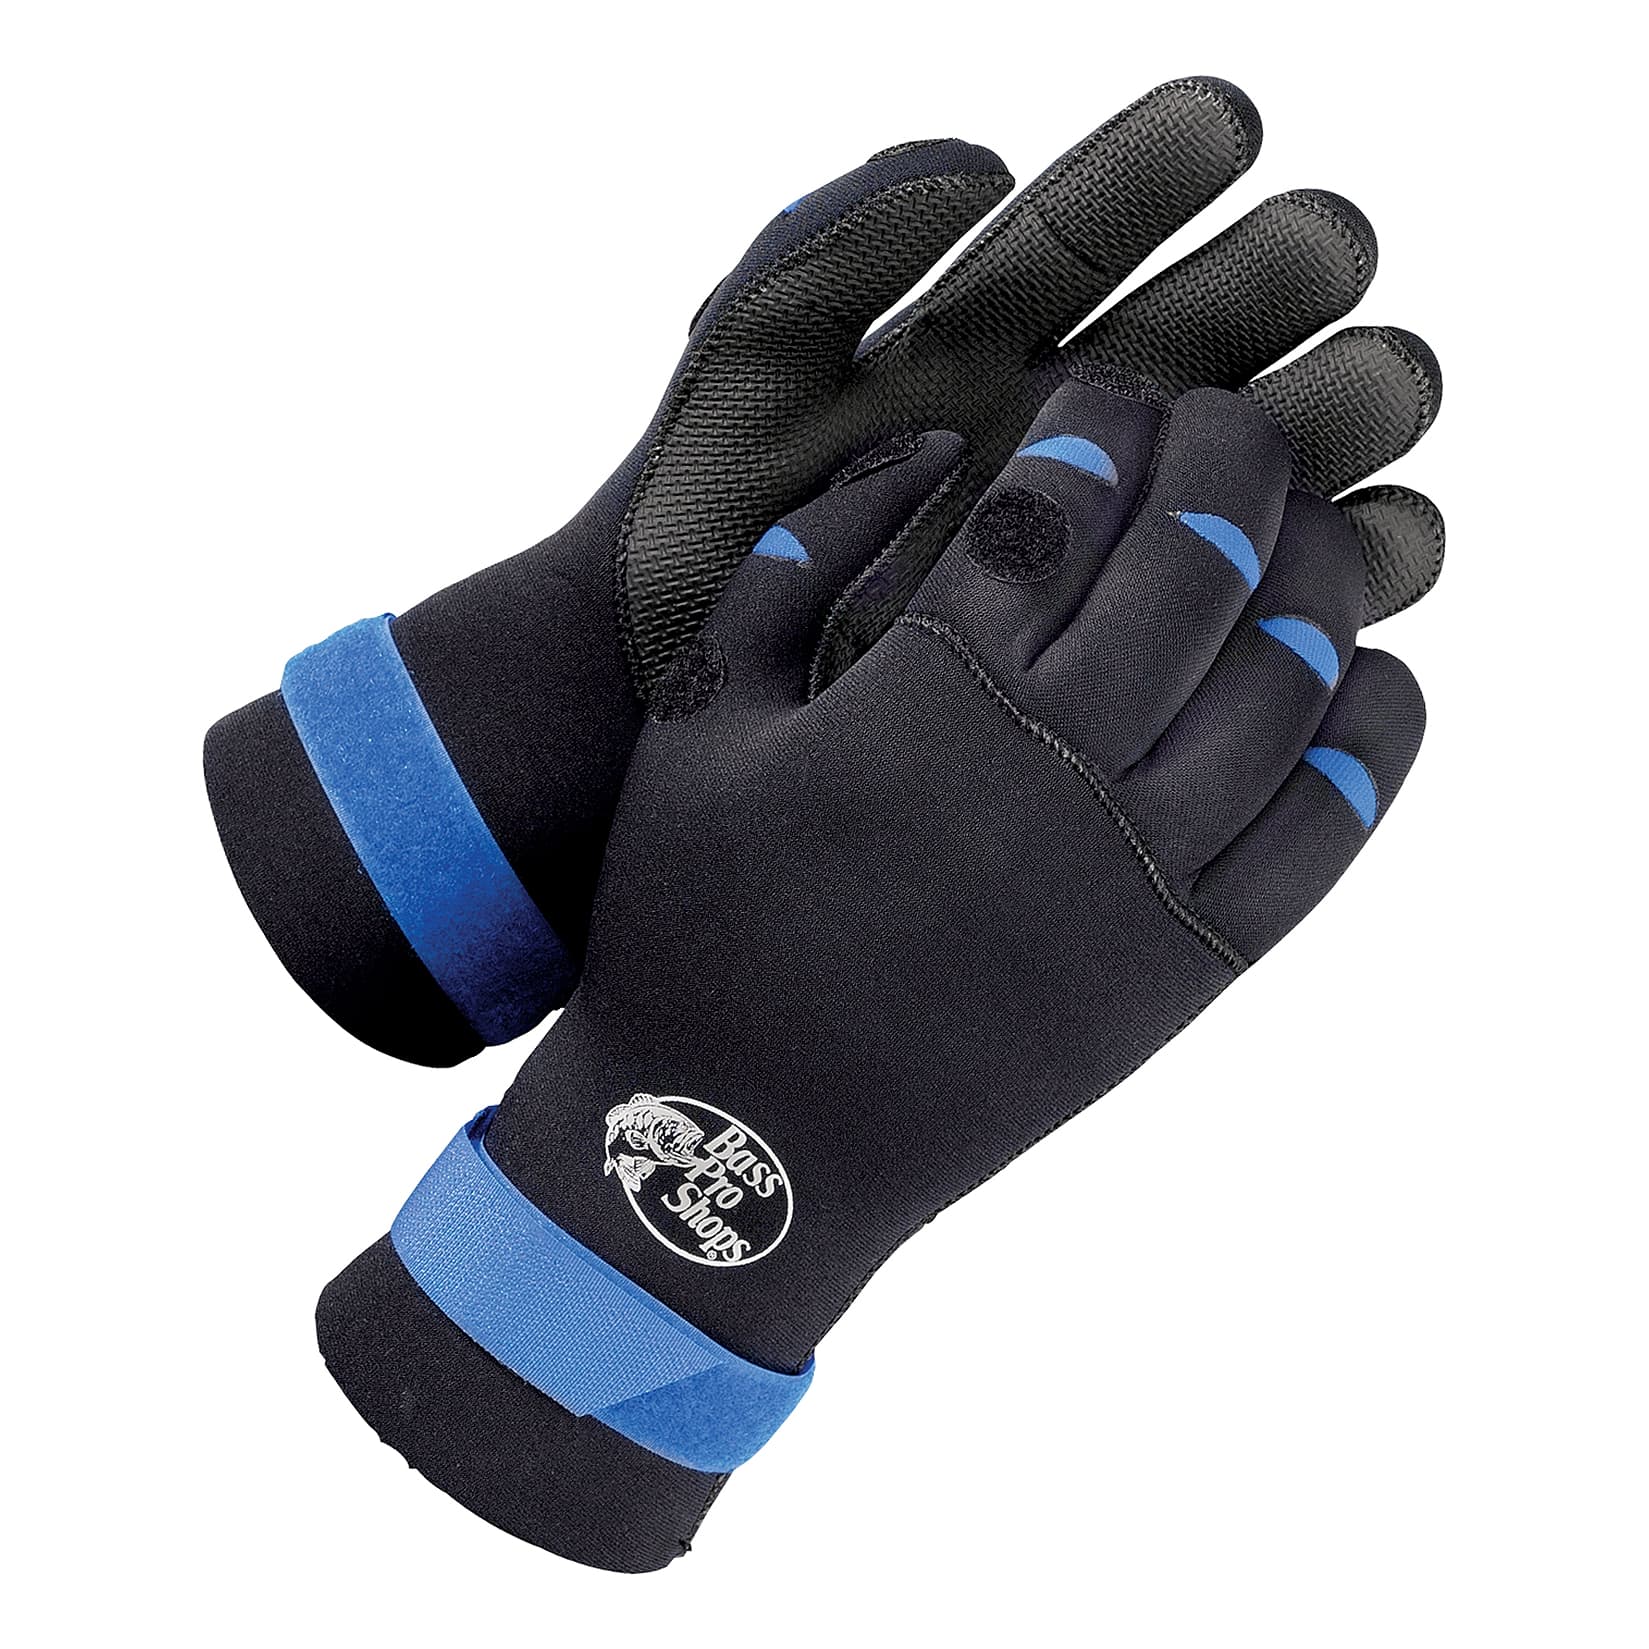 Outdoor Protective Gloves Hand Wrist Guard For Angling Fishing